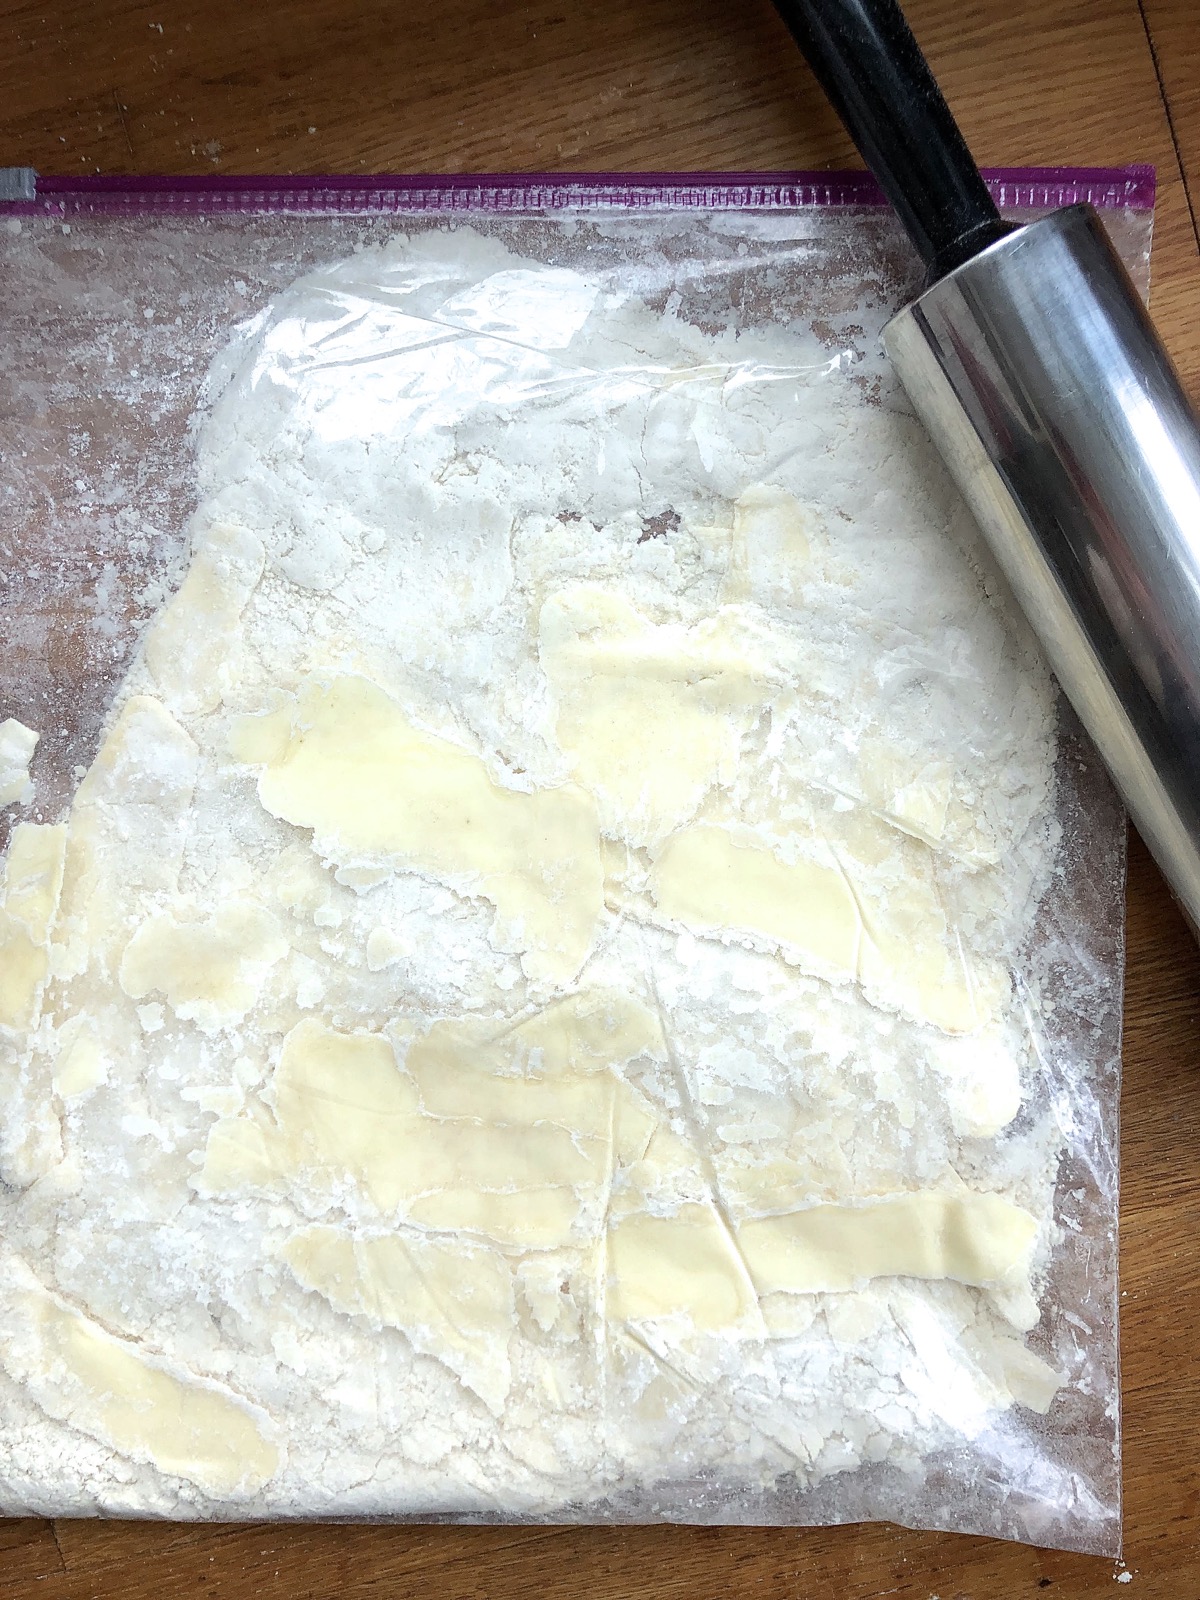 Chunks of butter in flour inside a zip-top bag, smeared and stuck to the bag's inner surface.